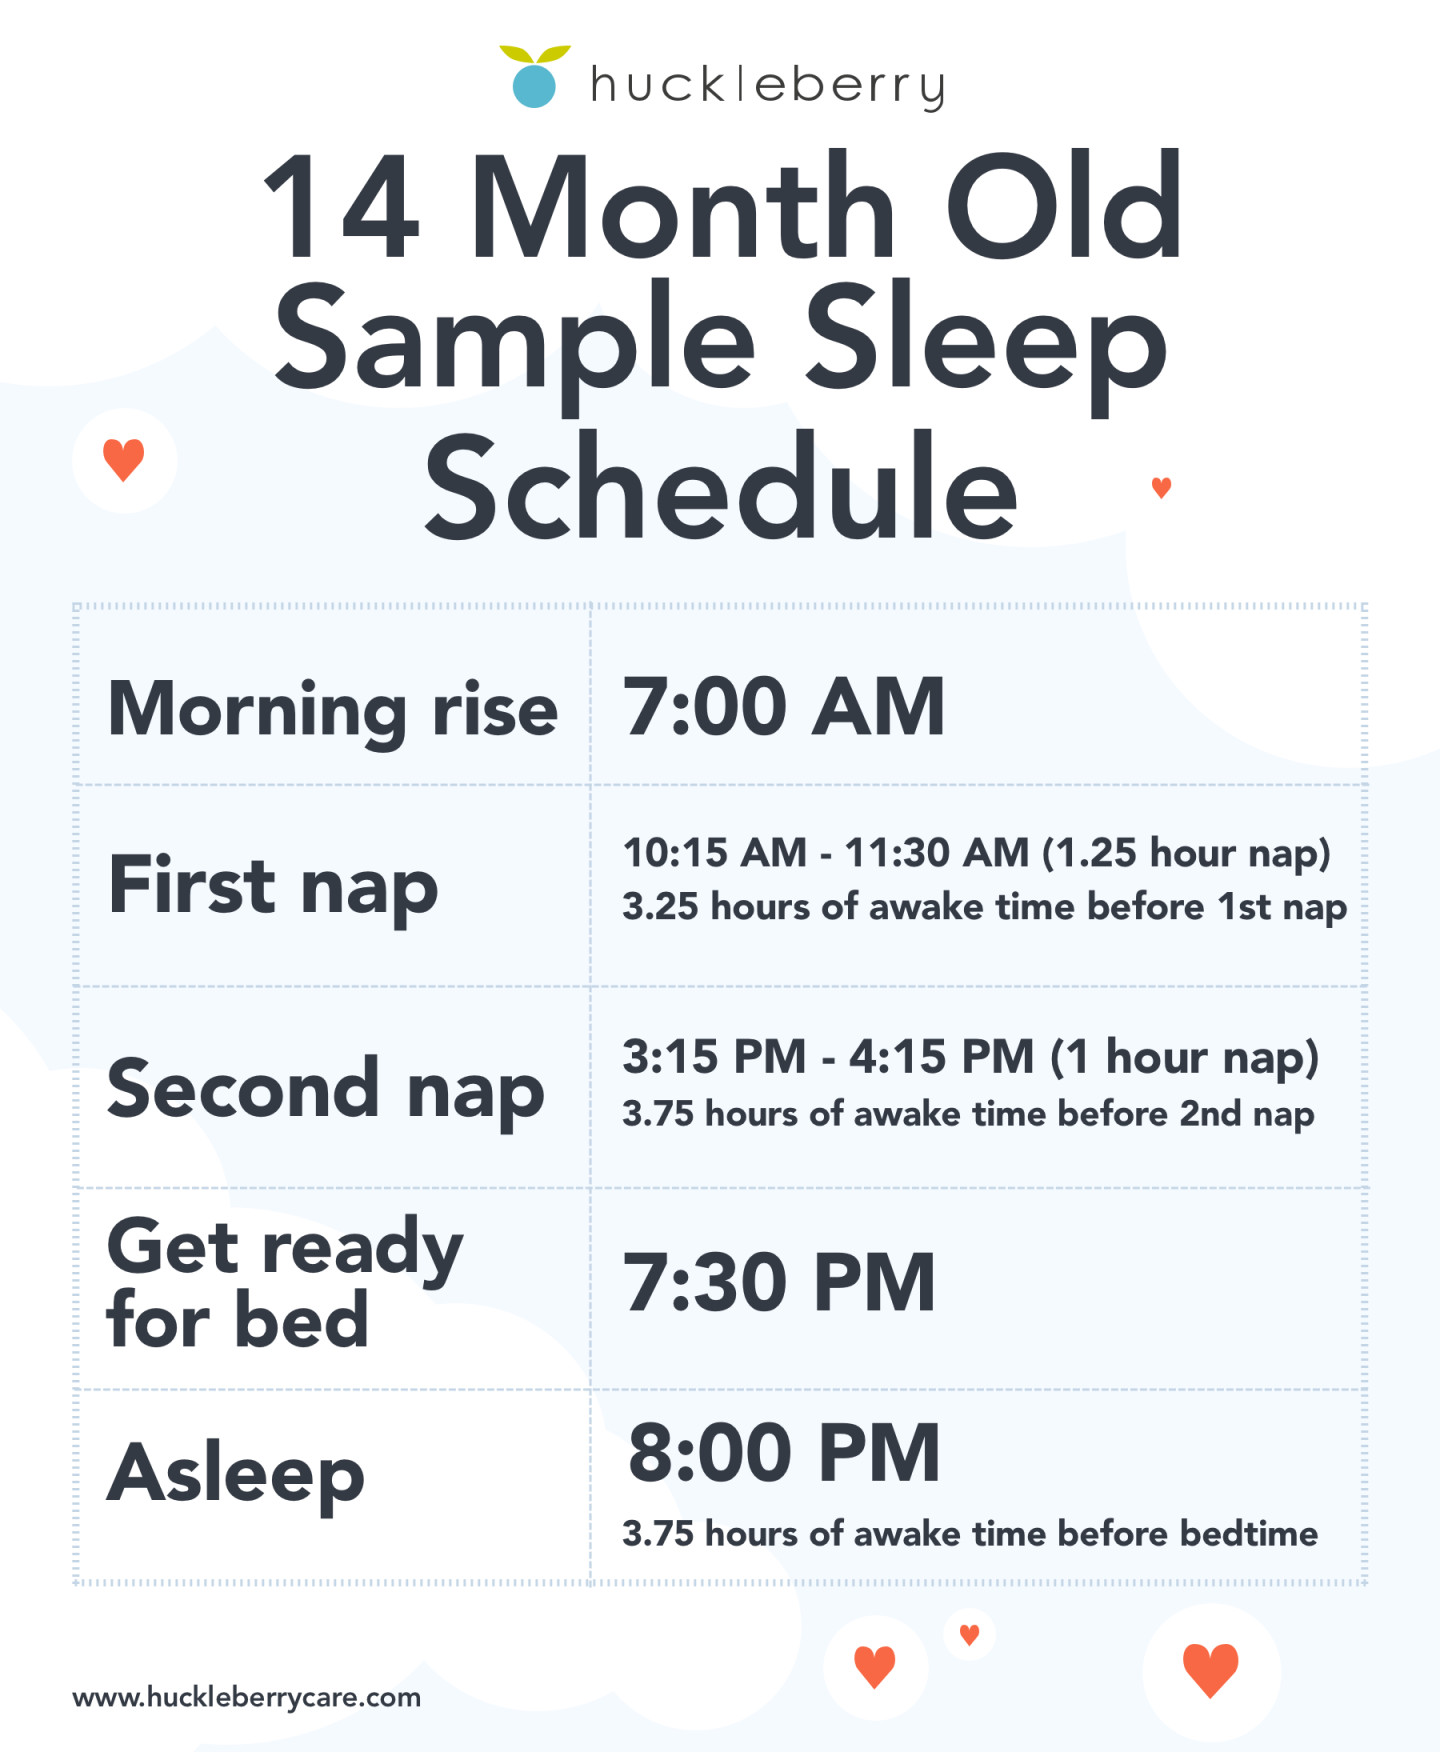 Huckleberry 14 month old sample sleep and nap schedule